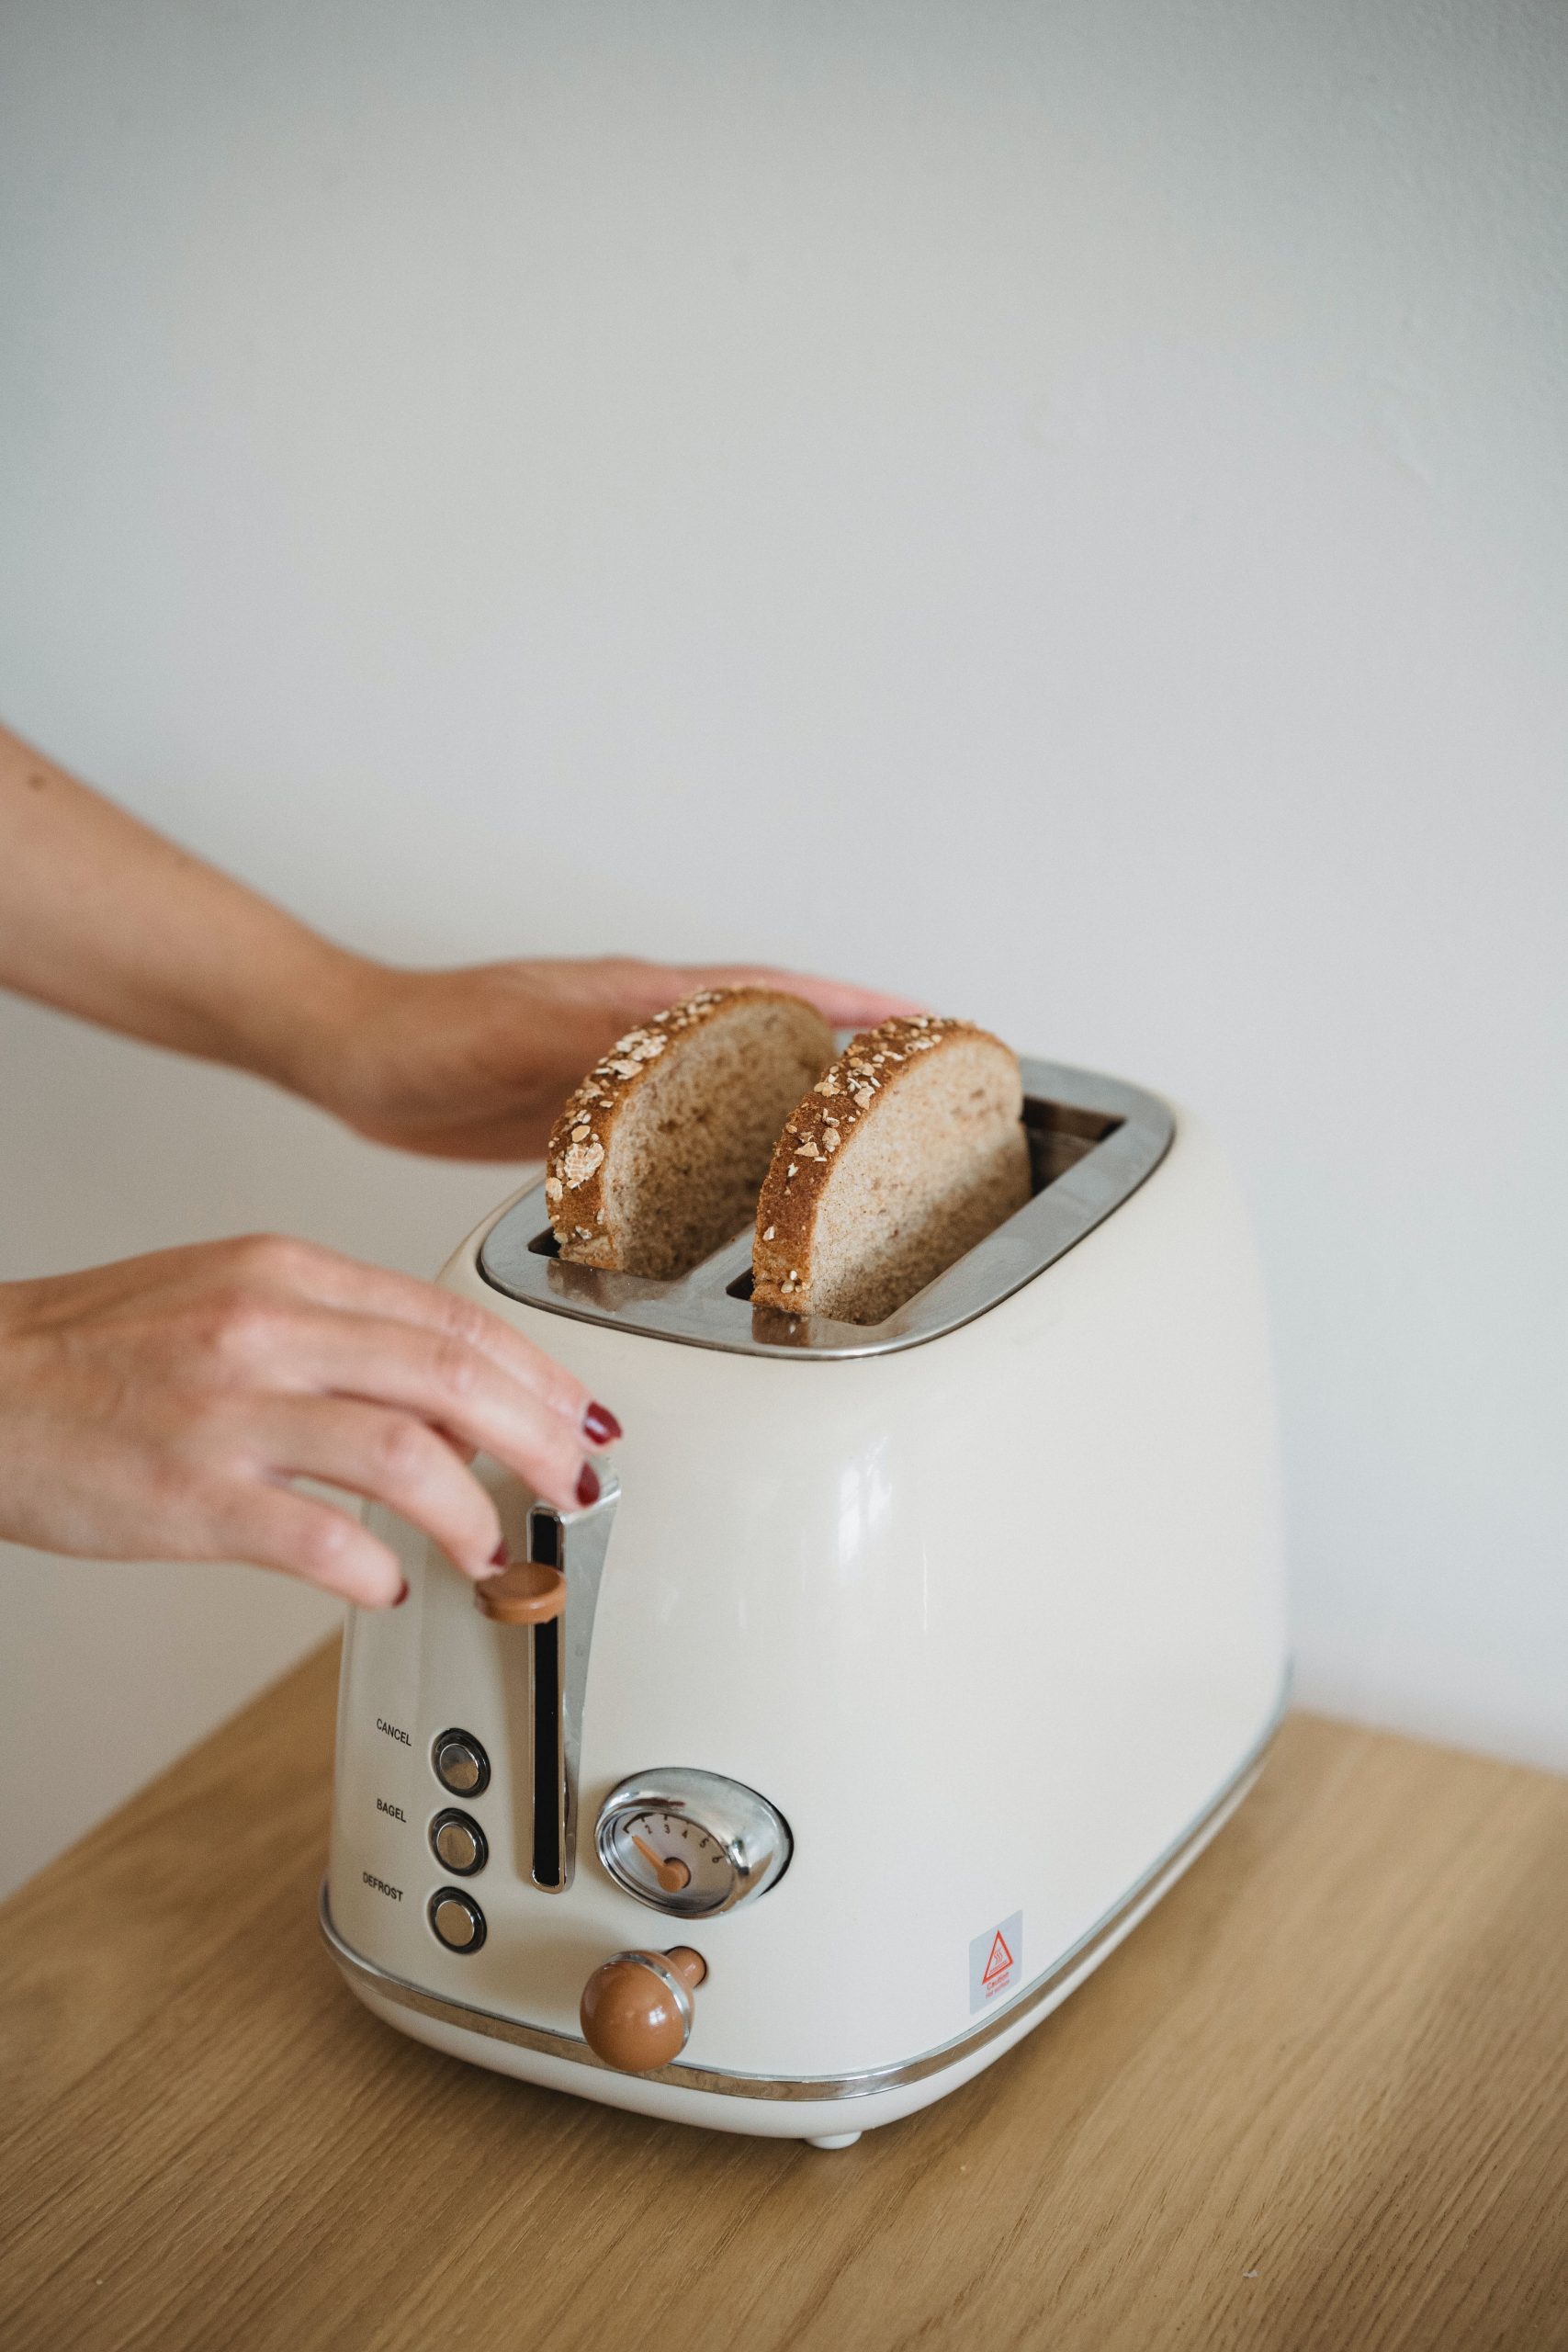 Yes – You need to clean your toaster.